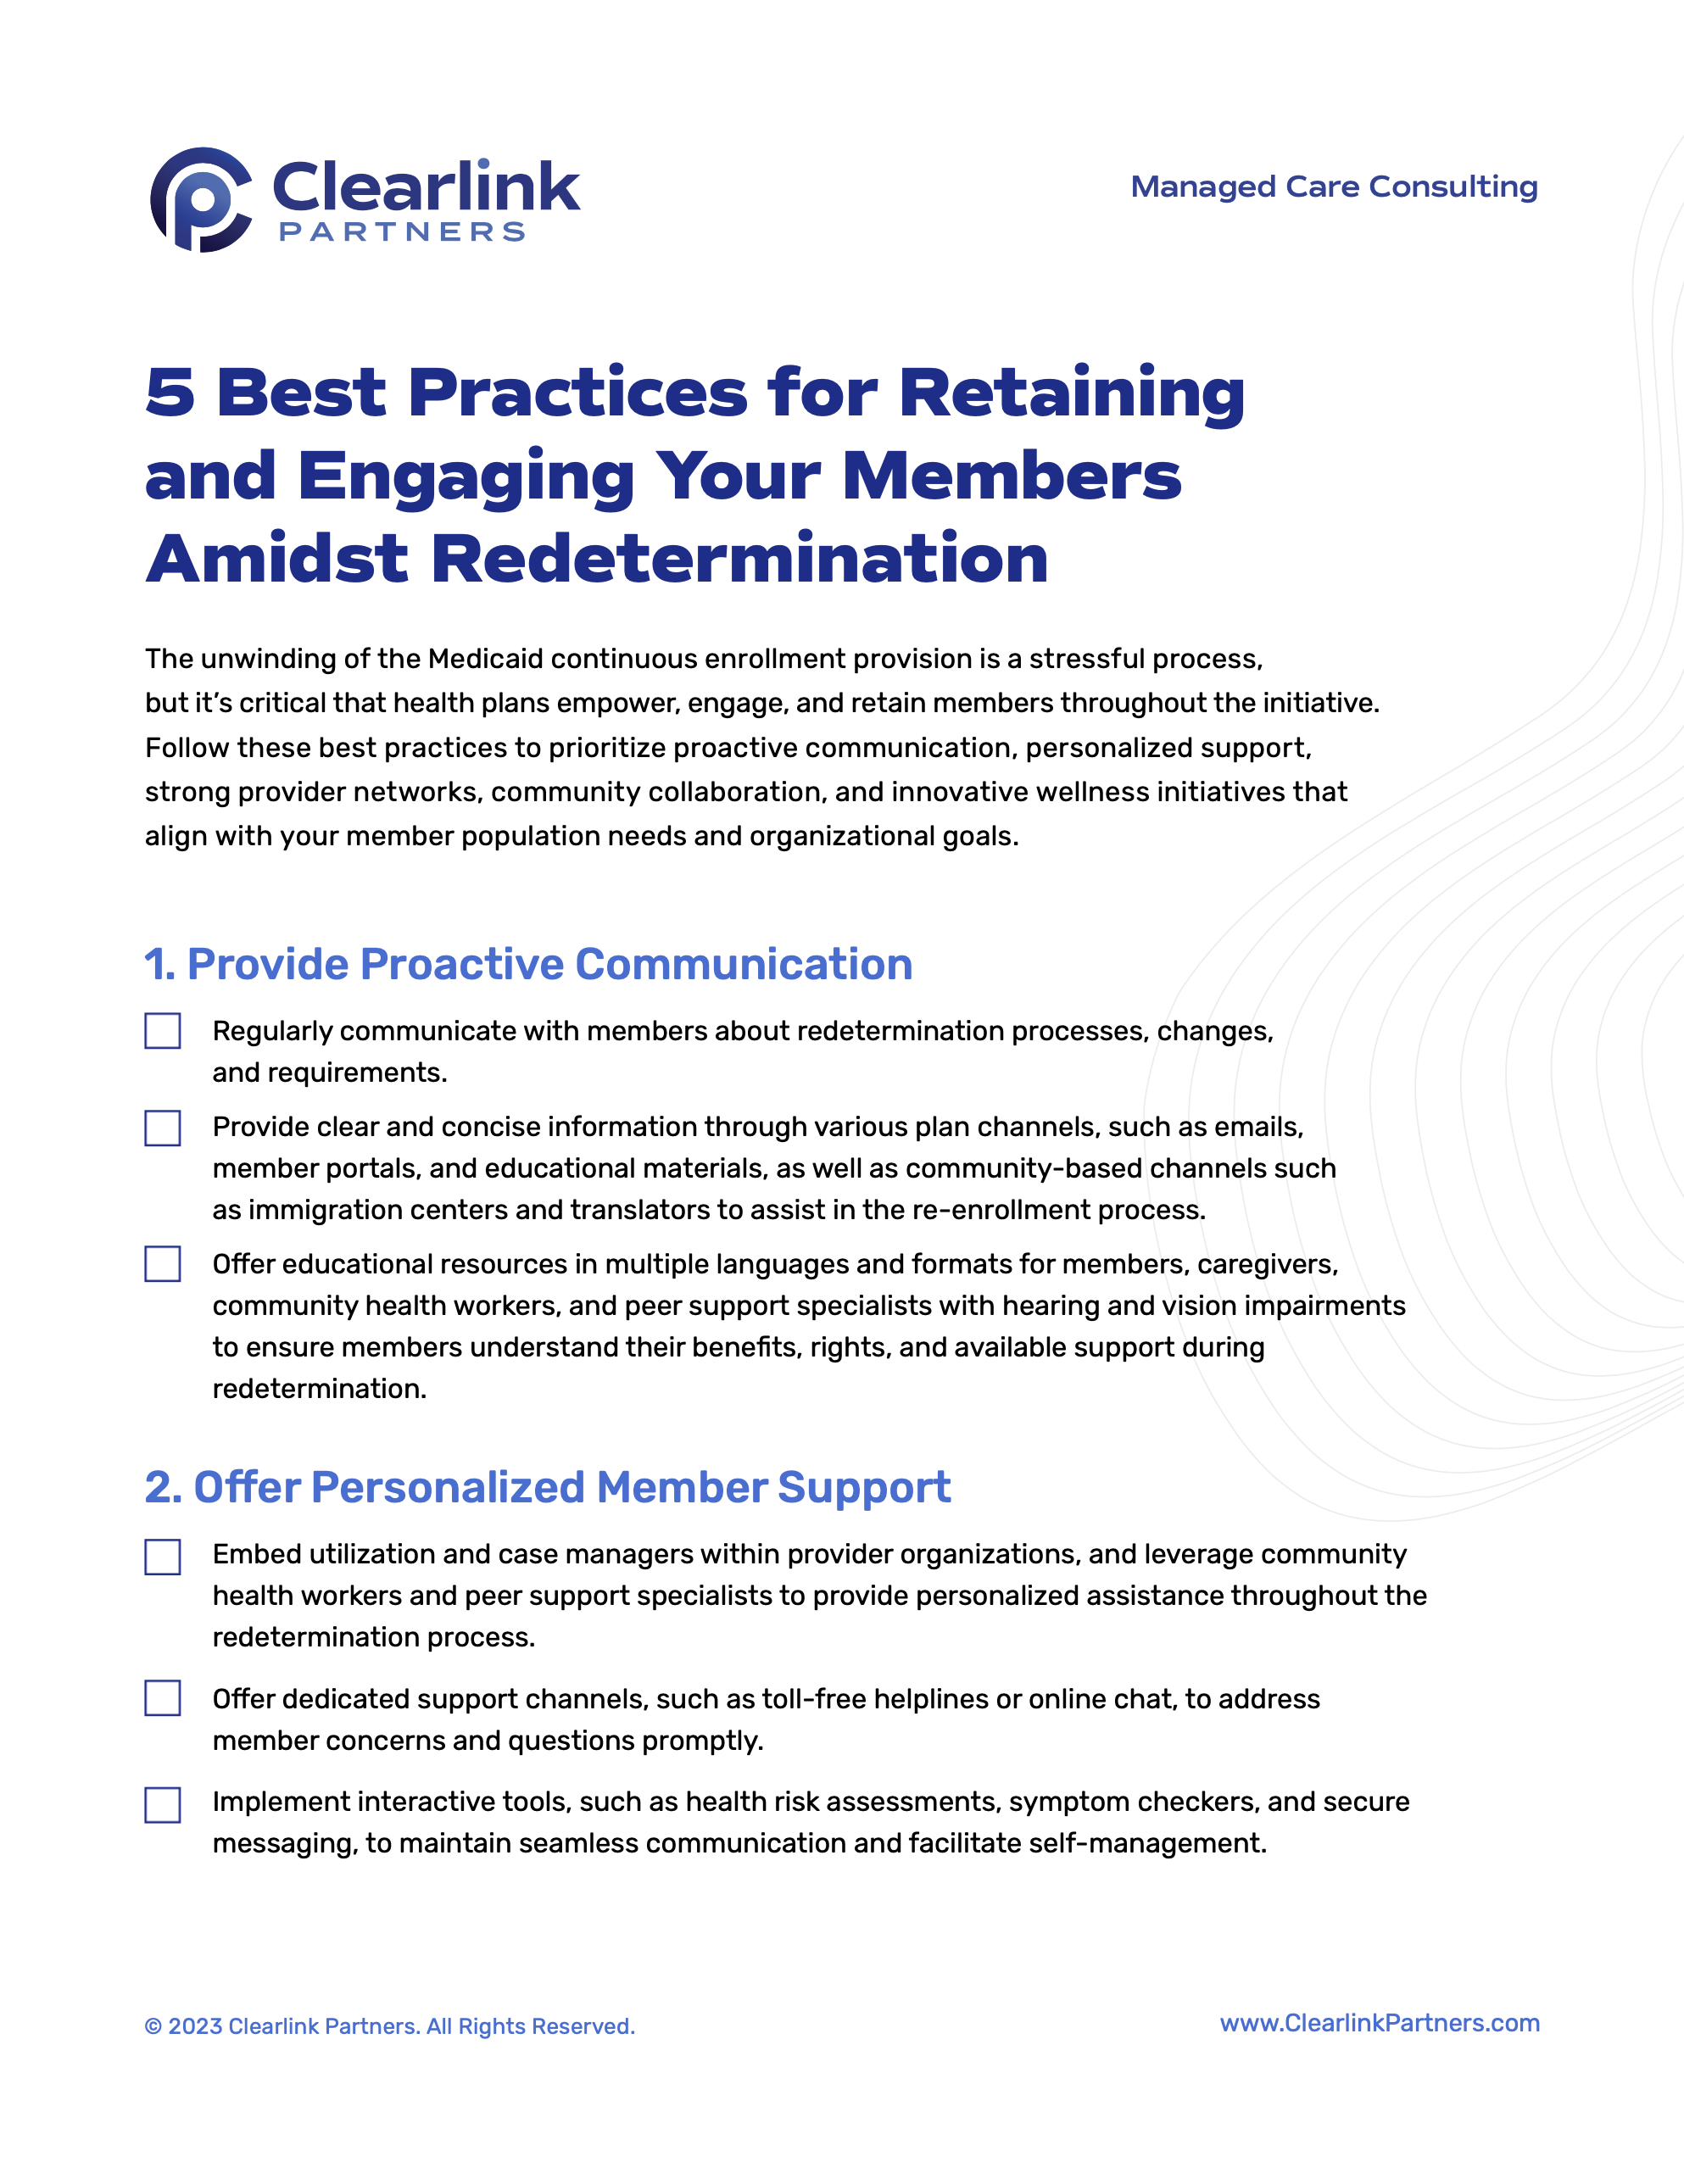 5 Best Practices for Retaining and Engaging Your Members Amidst Redetermination